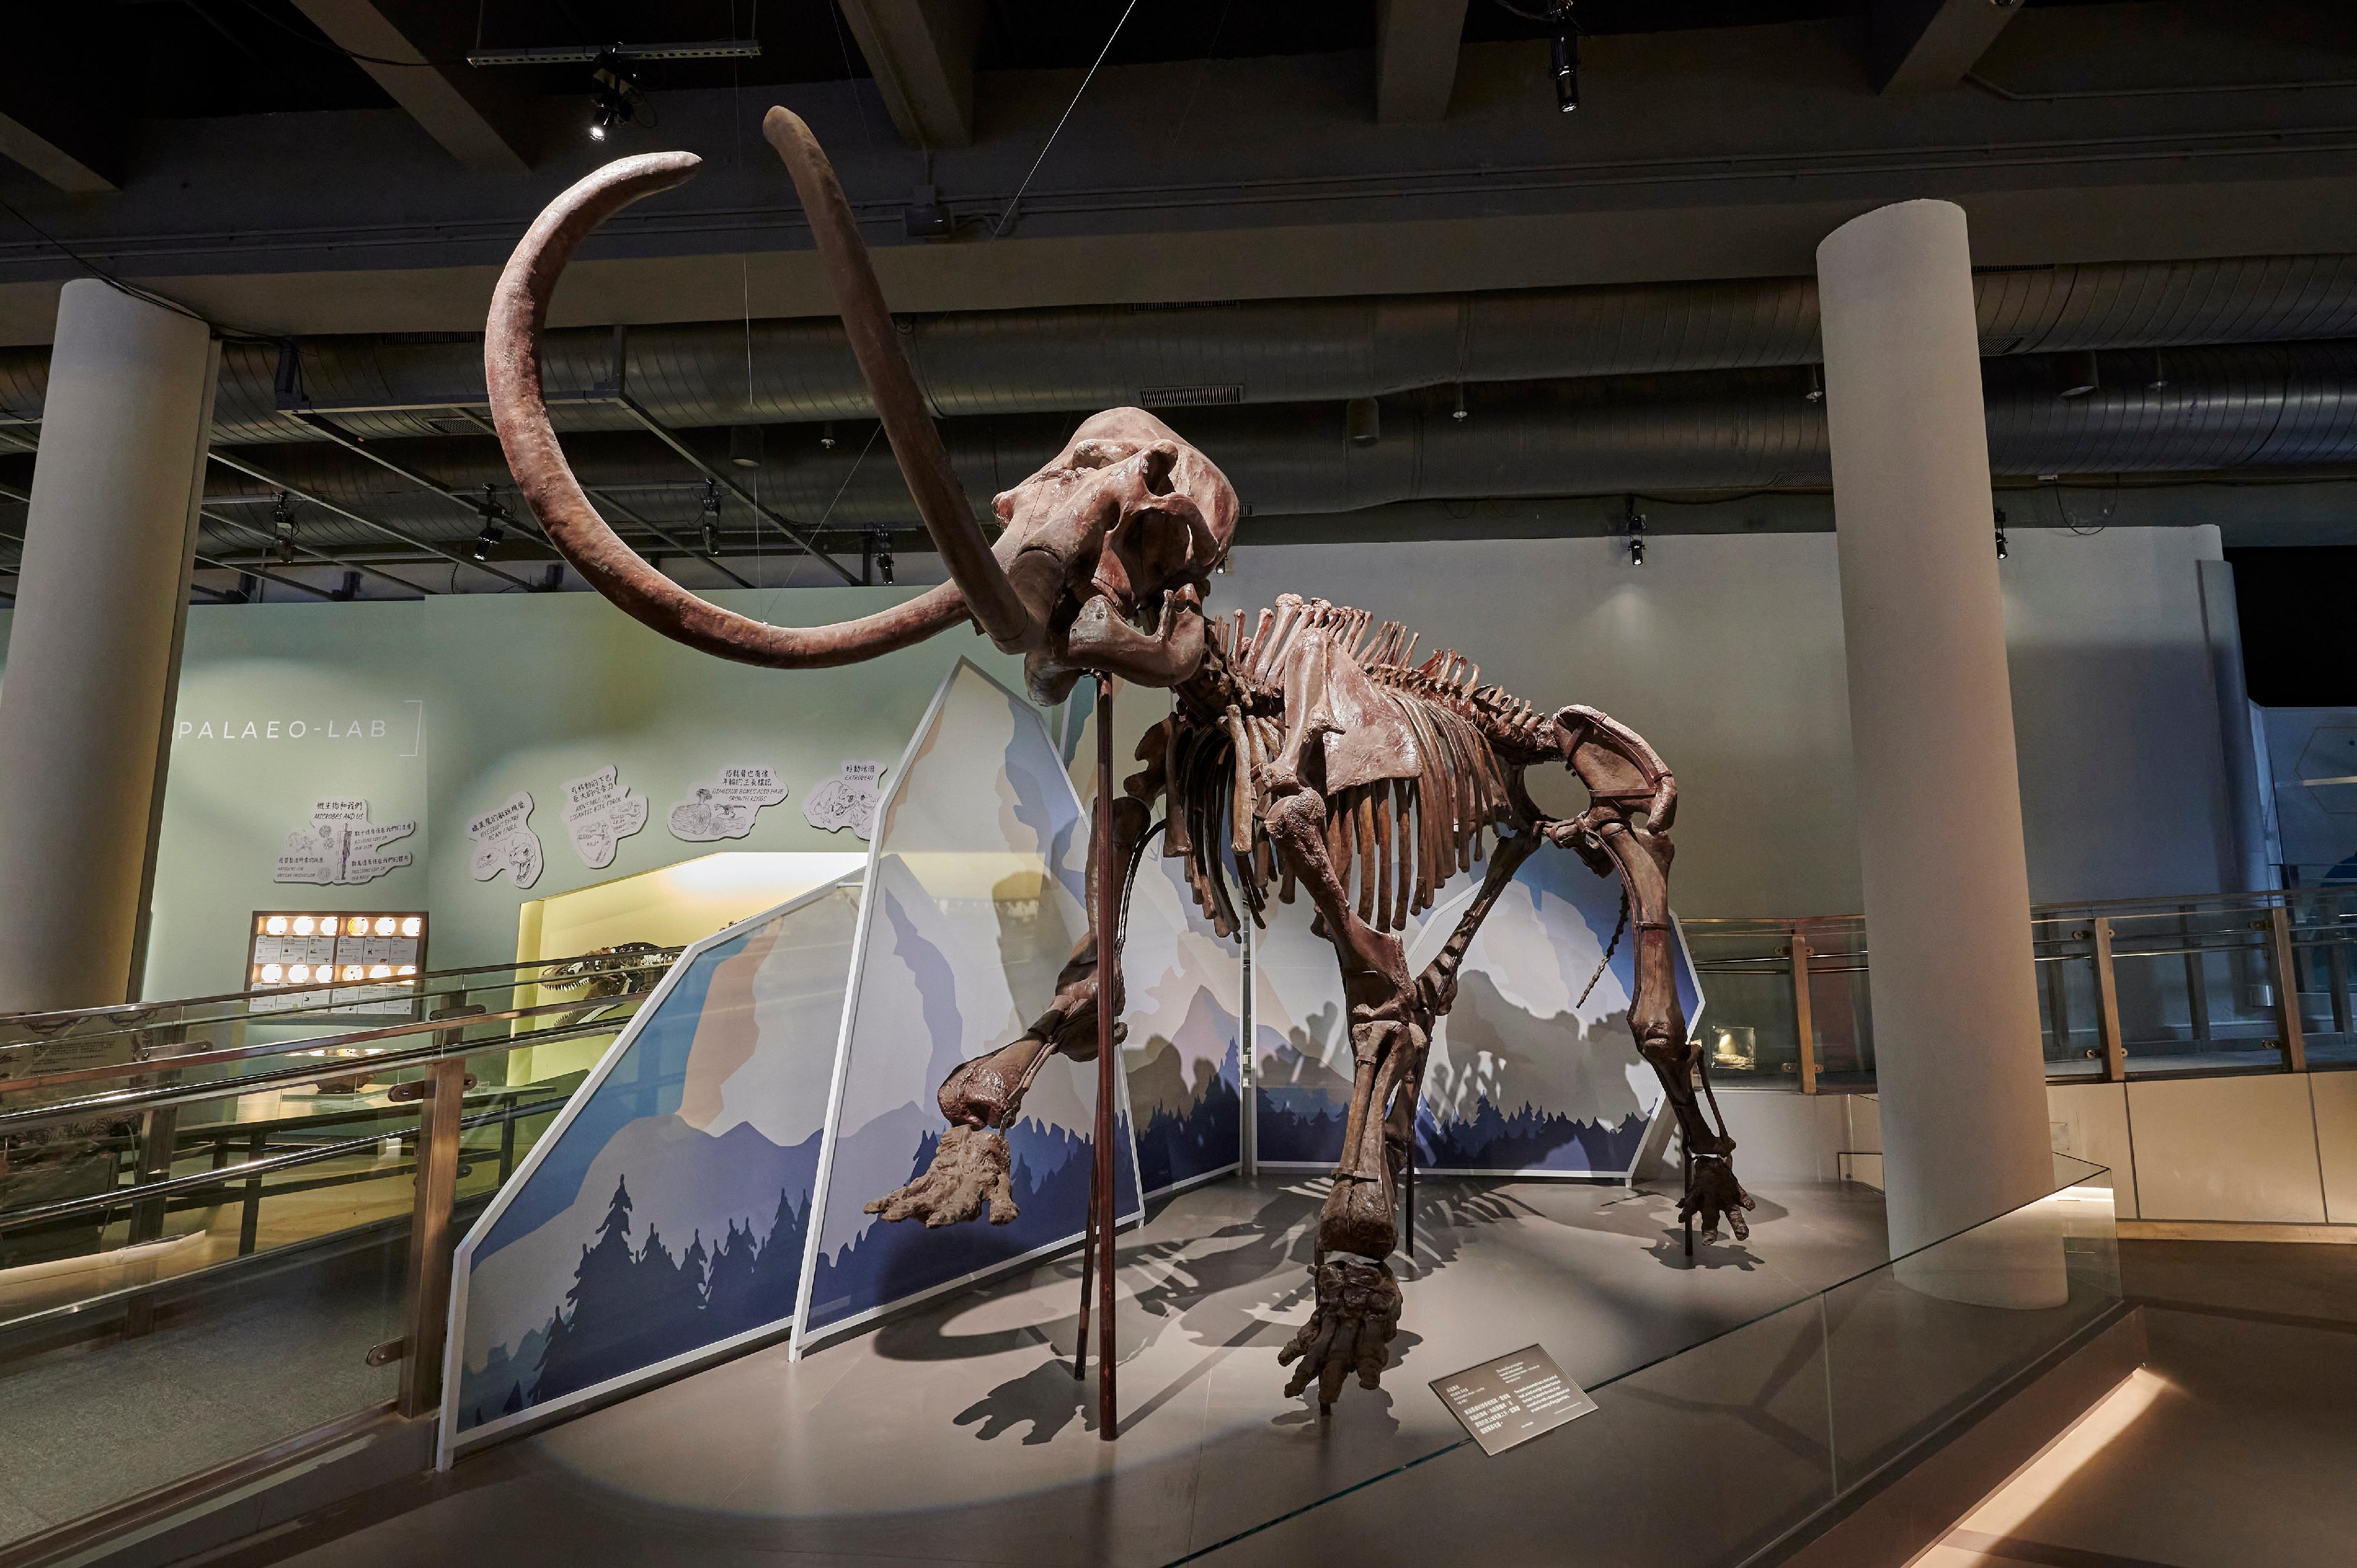 Part of the permanent exhibition "Extinction·Resilience" at the Palaeontology Gallery at the Hong Kong Science Museum will be temporarily closed from April 6 (Saturday) to the end of April for renewal of exhibits. Photo shows the woolly mammoth fossil with a height of over 3 metres, which will be returned to the National Natural History Museum of China.